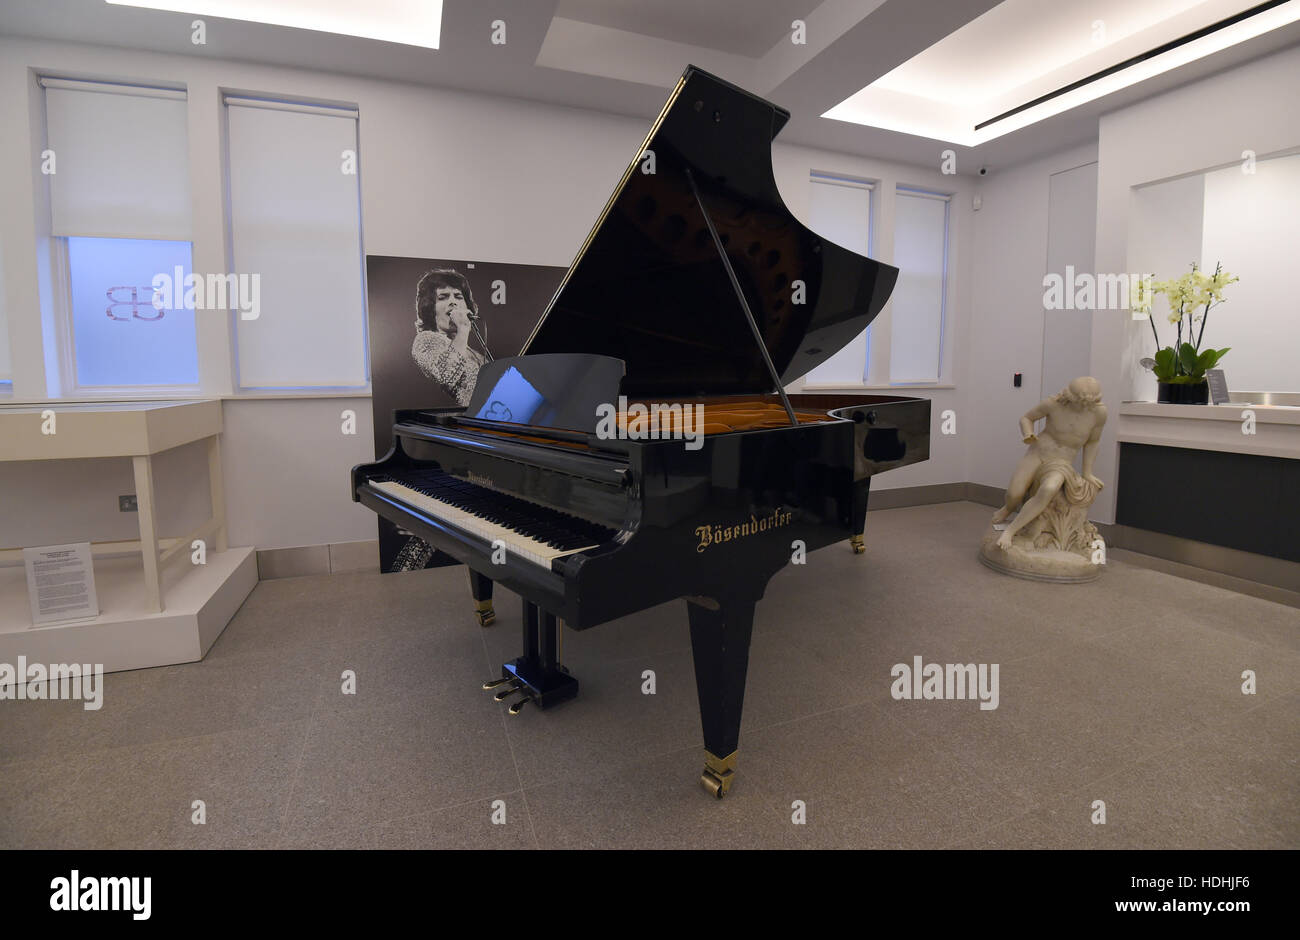 An Imperial Bosendorfer concert grand piano, played by Queen, Coldplay, Robbie Williams and Talk Talk on display ahead of the the Entertainment Memorabilia Sale at Bonhams in Knightsbridge, London later this week. Stock Photo